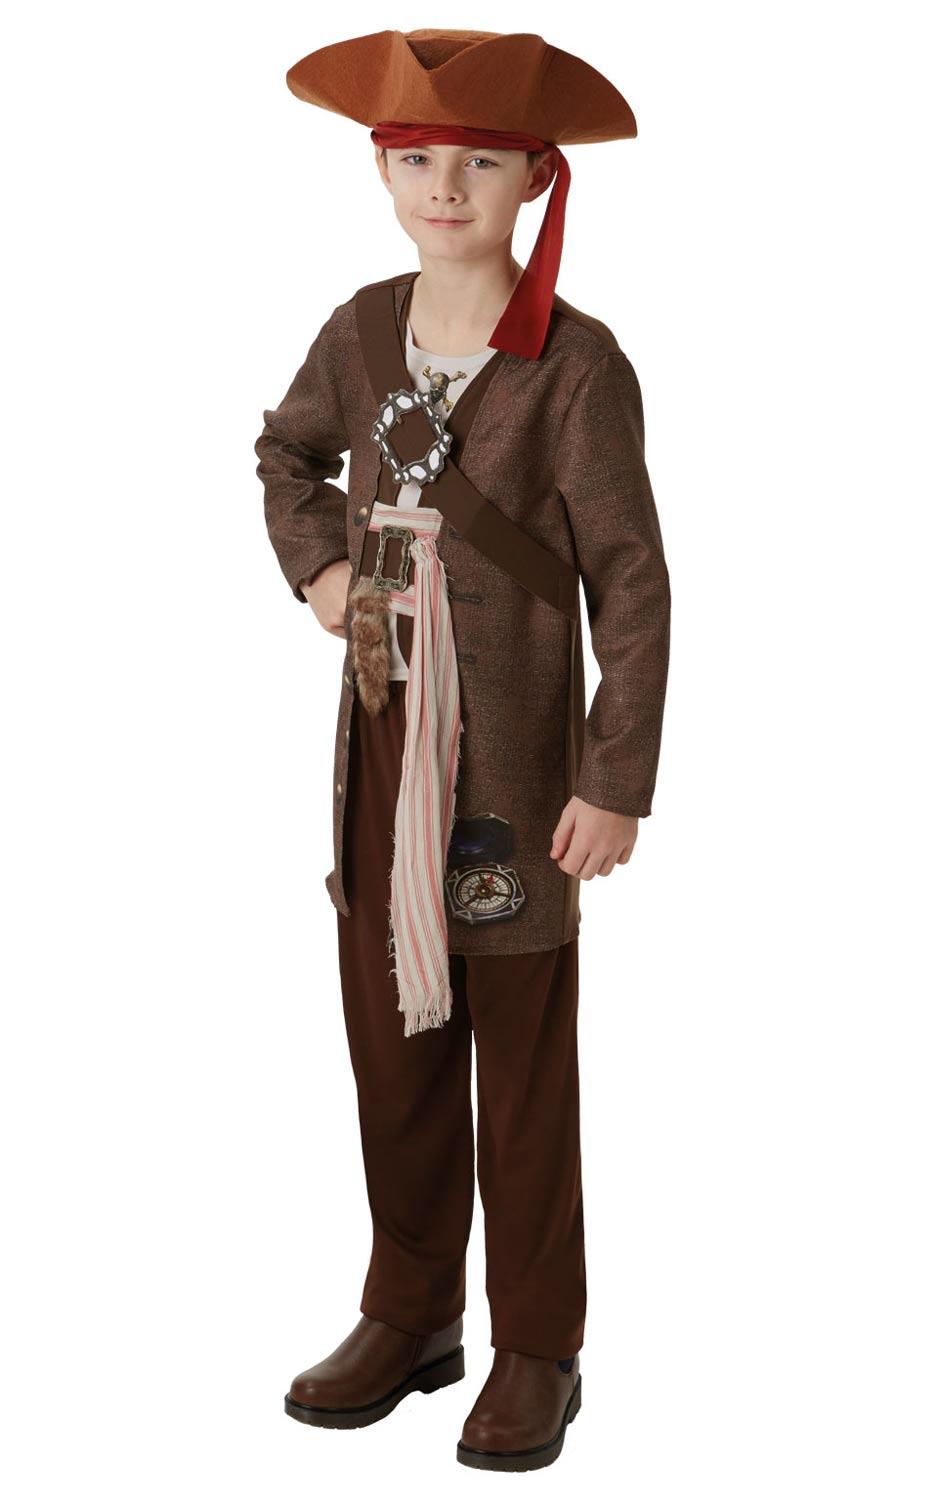 Children's Deluxe Captain Jack Sparrow Fancy Dress by Rubies 640063 available here at Karnival Costumes online party shop